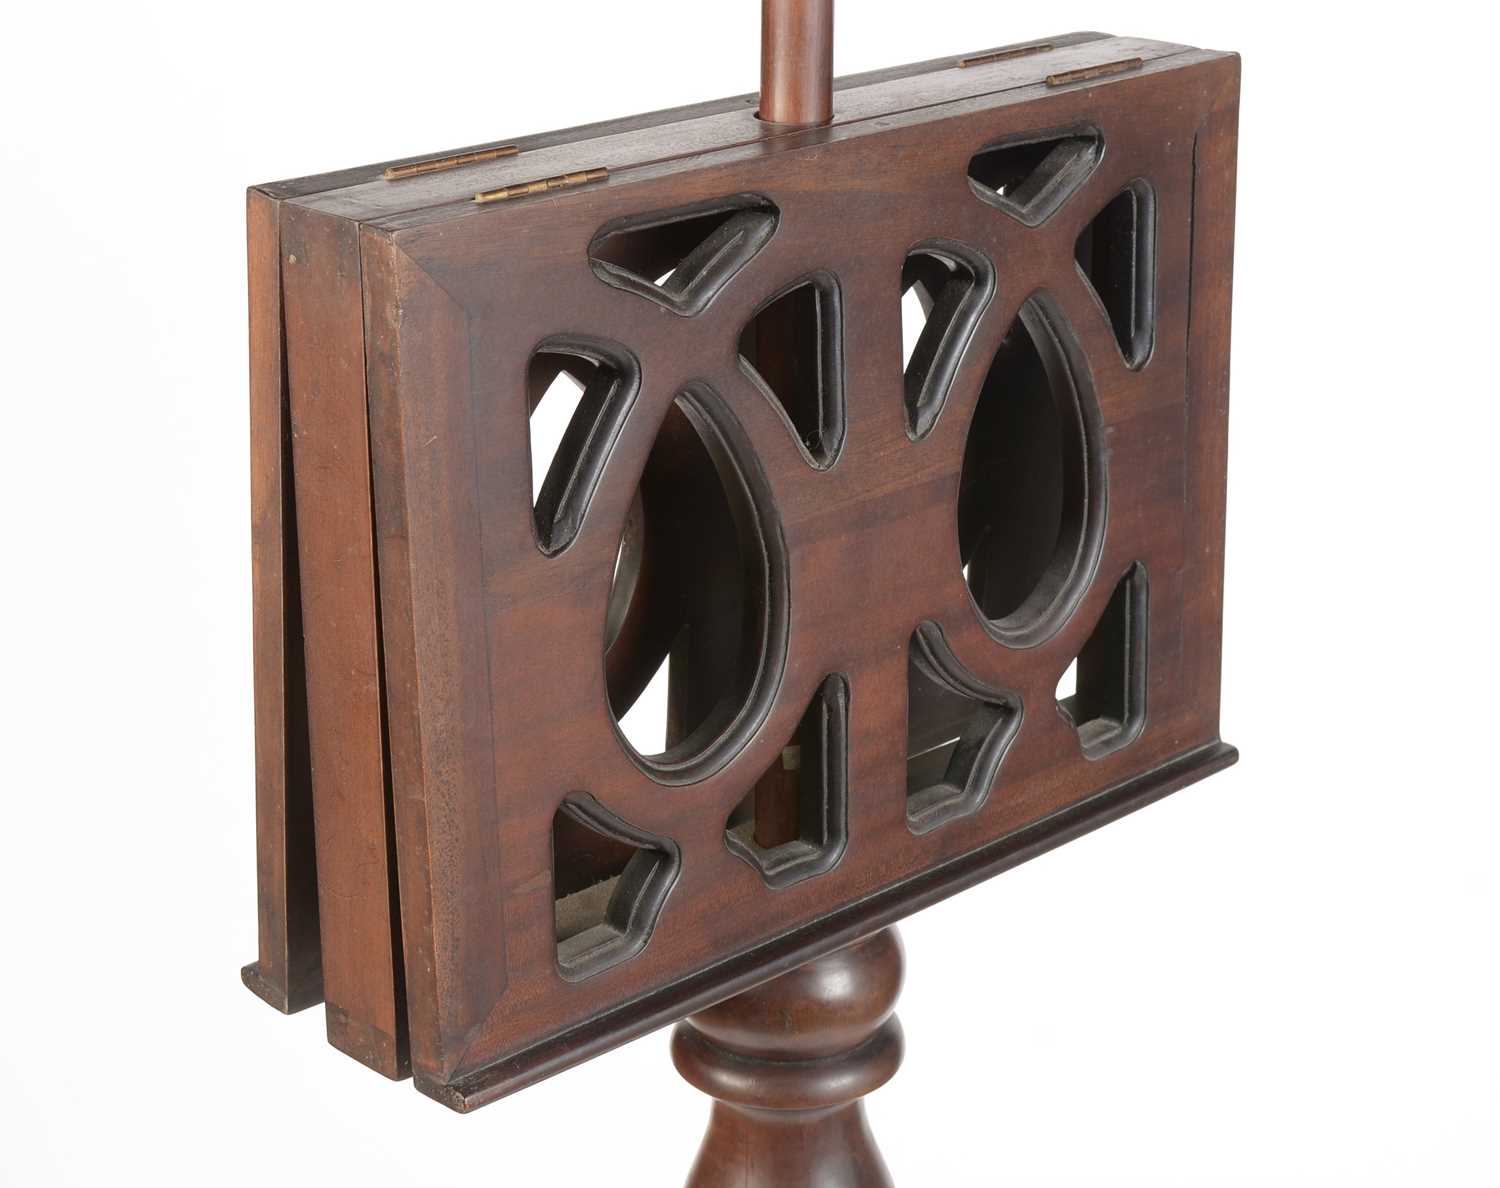 Mahogany duet stand - Image 8 of 9